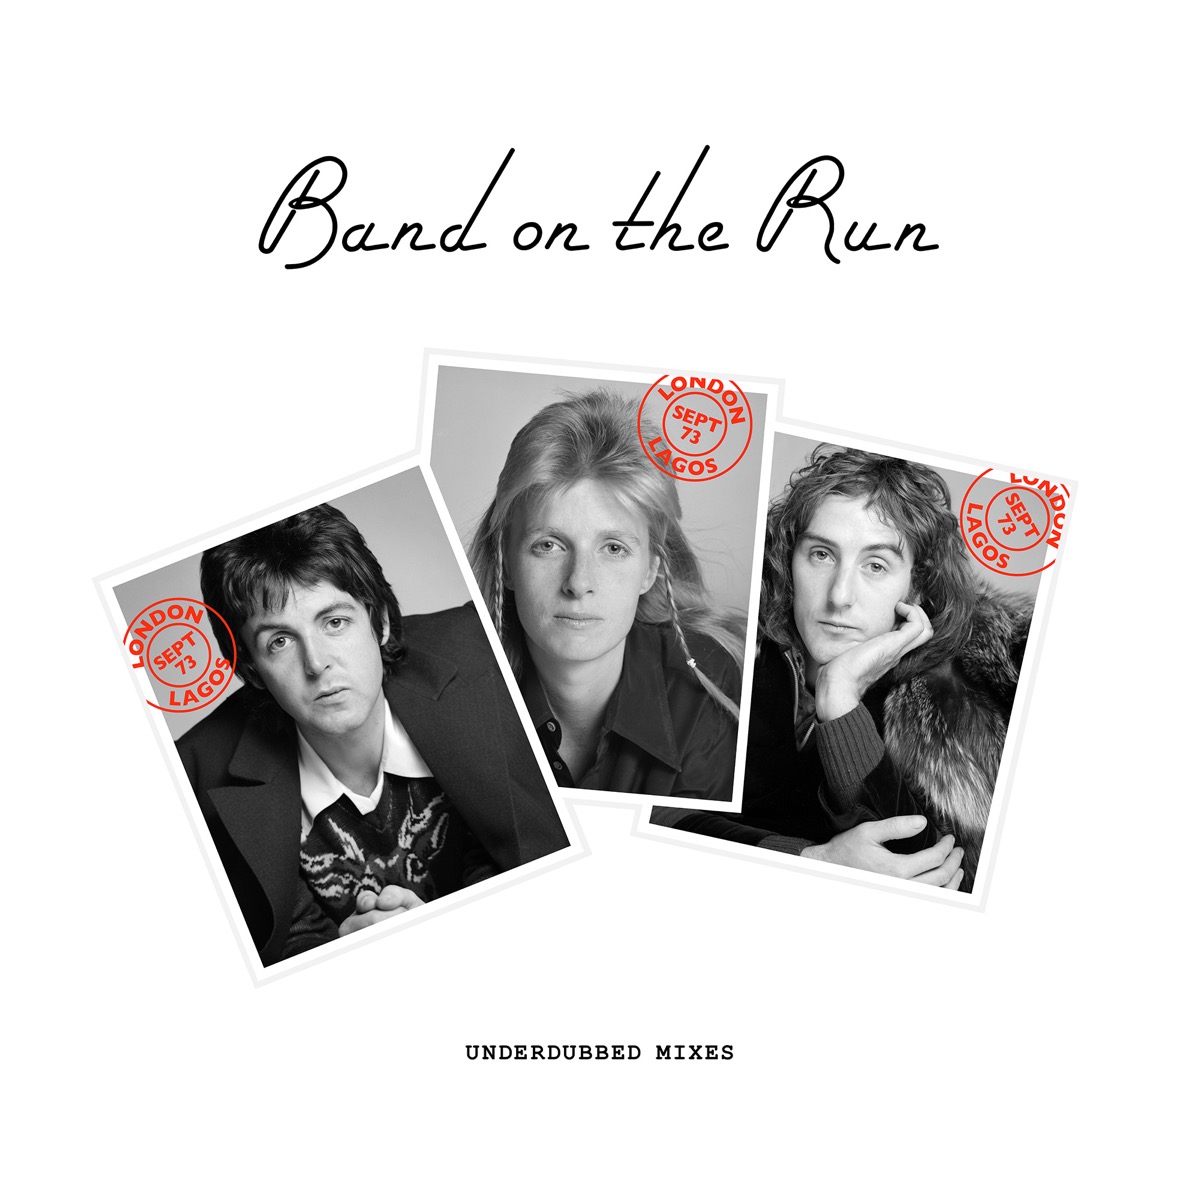 "Band on the Run" by Paul McCartney and Wings album cover